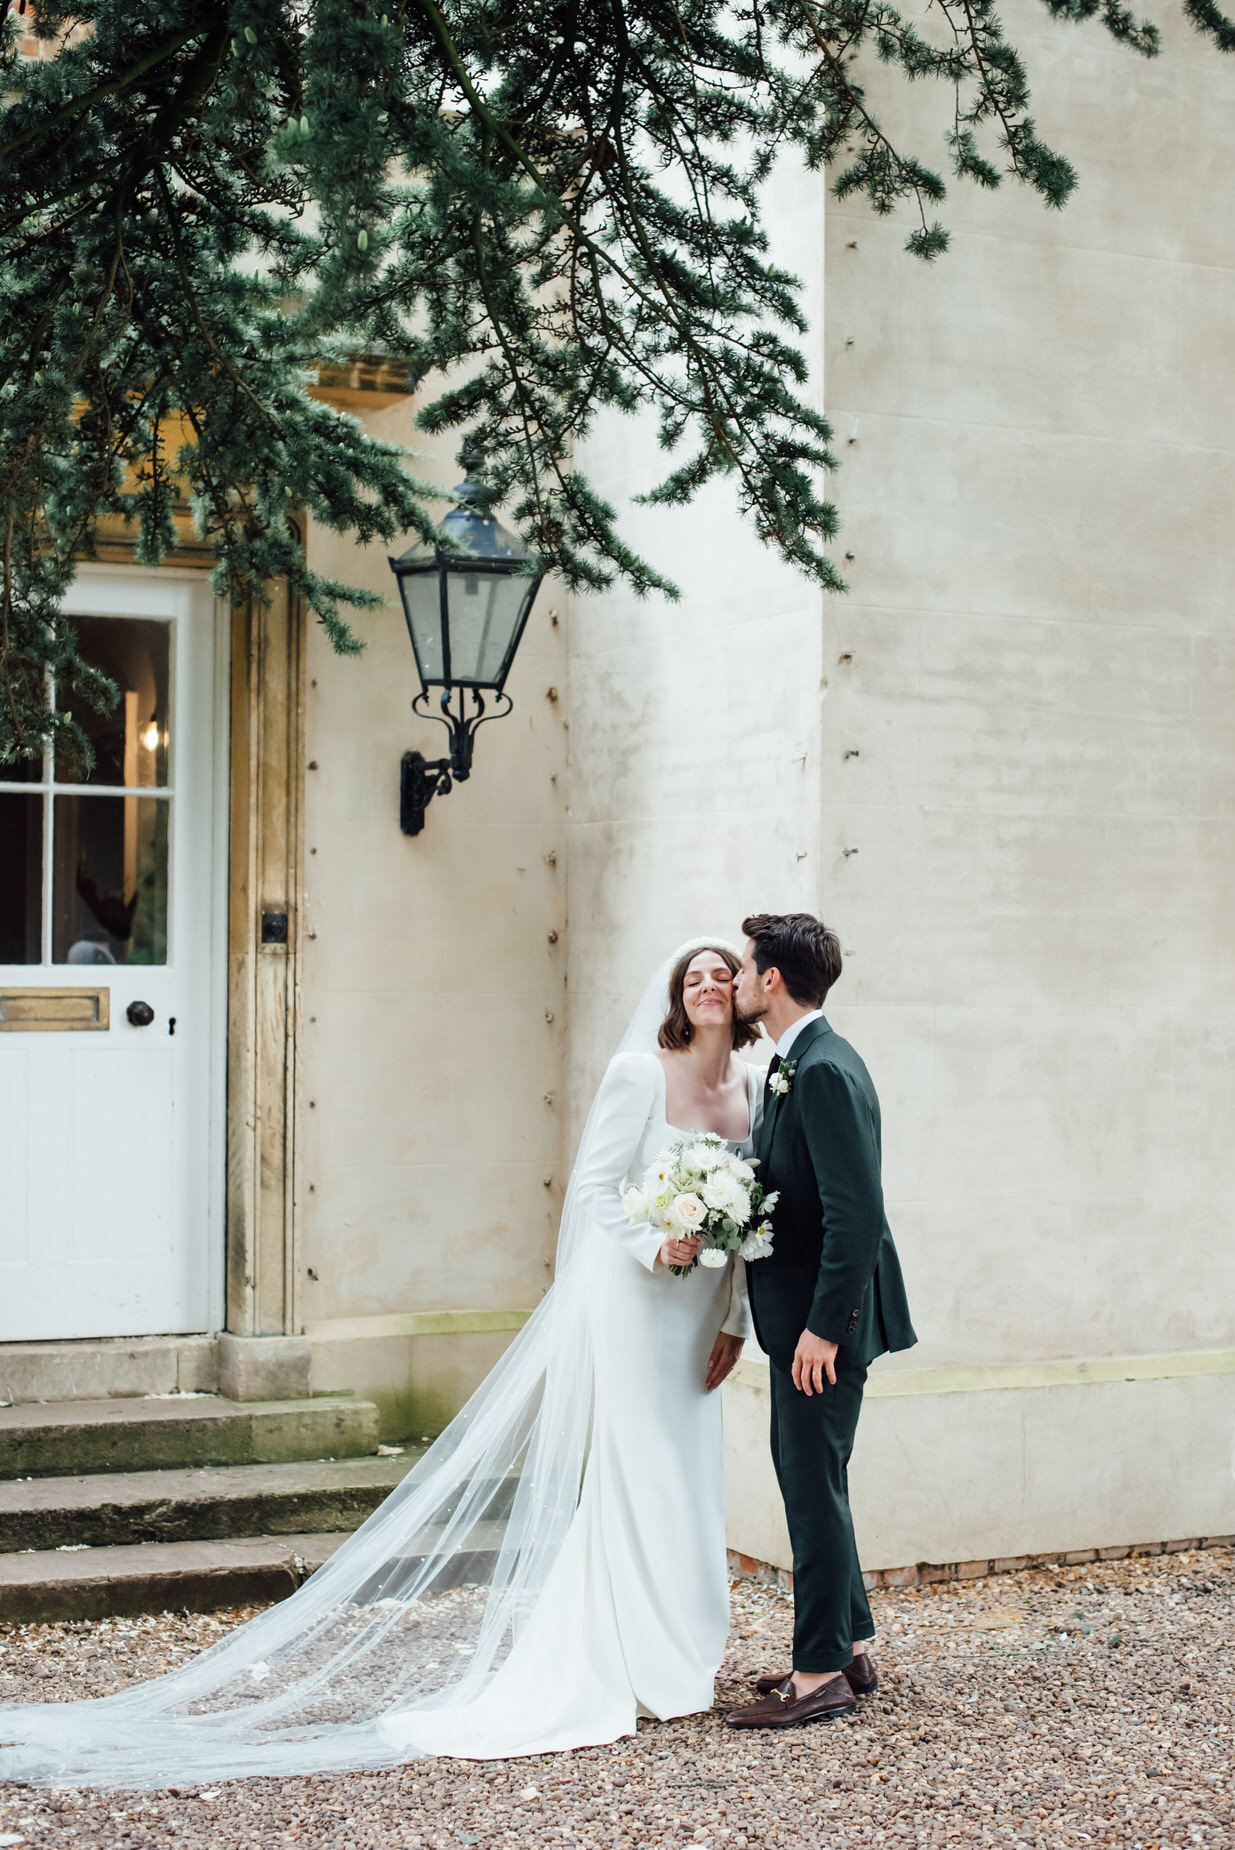 wedding portrait, Aswarby bride, authentic wedding photography, Aswarby Rectory Wedding, michelle wood photographer